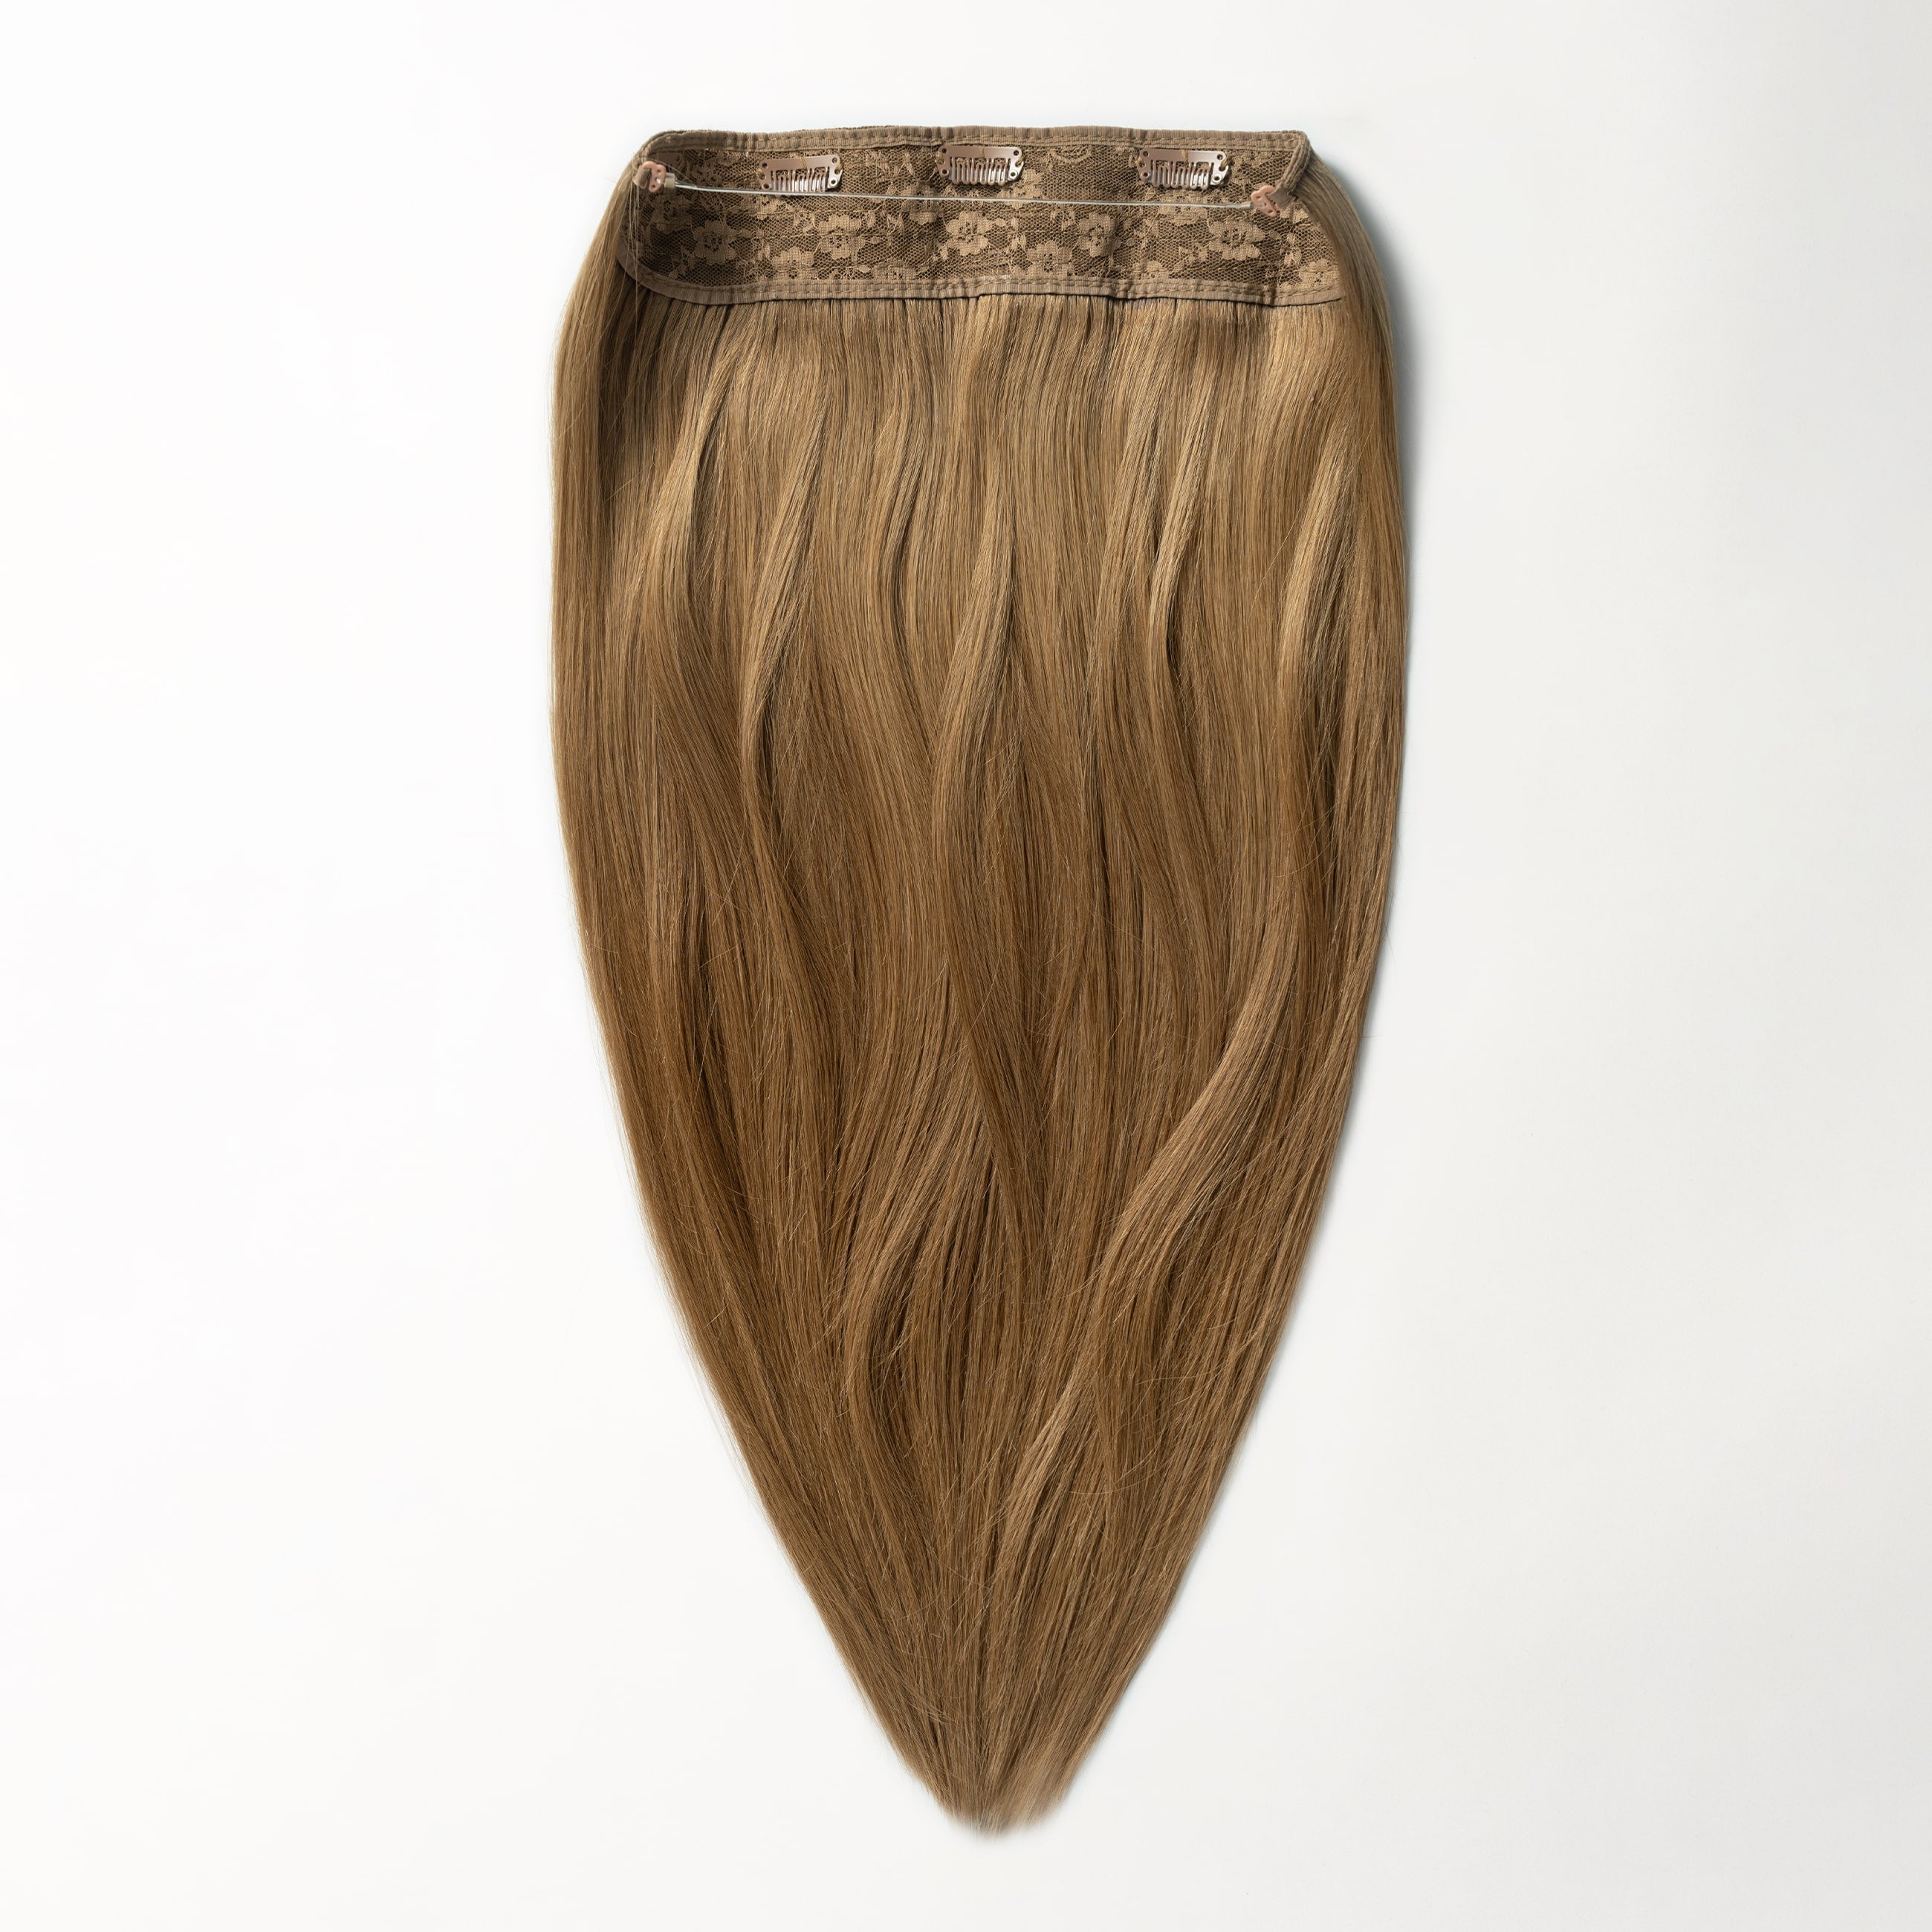 Halo hair extensions - Light Natural Brown 5